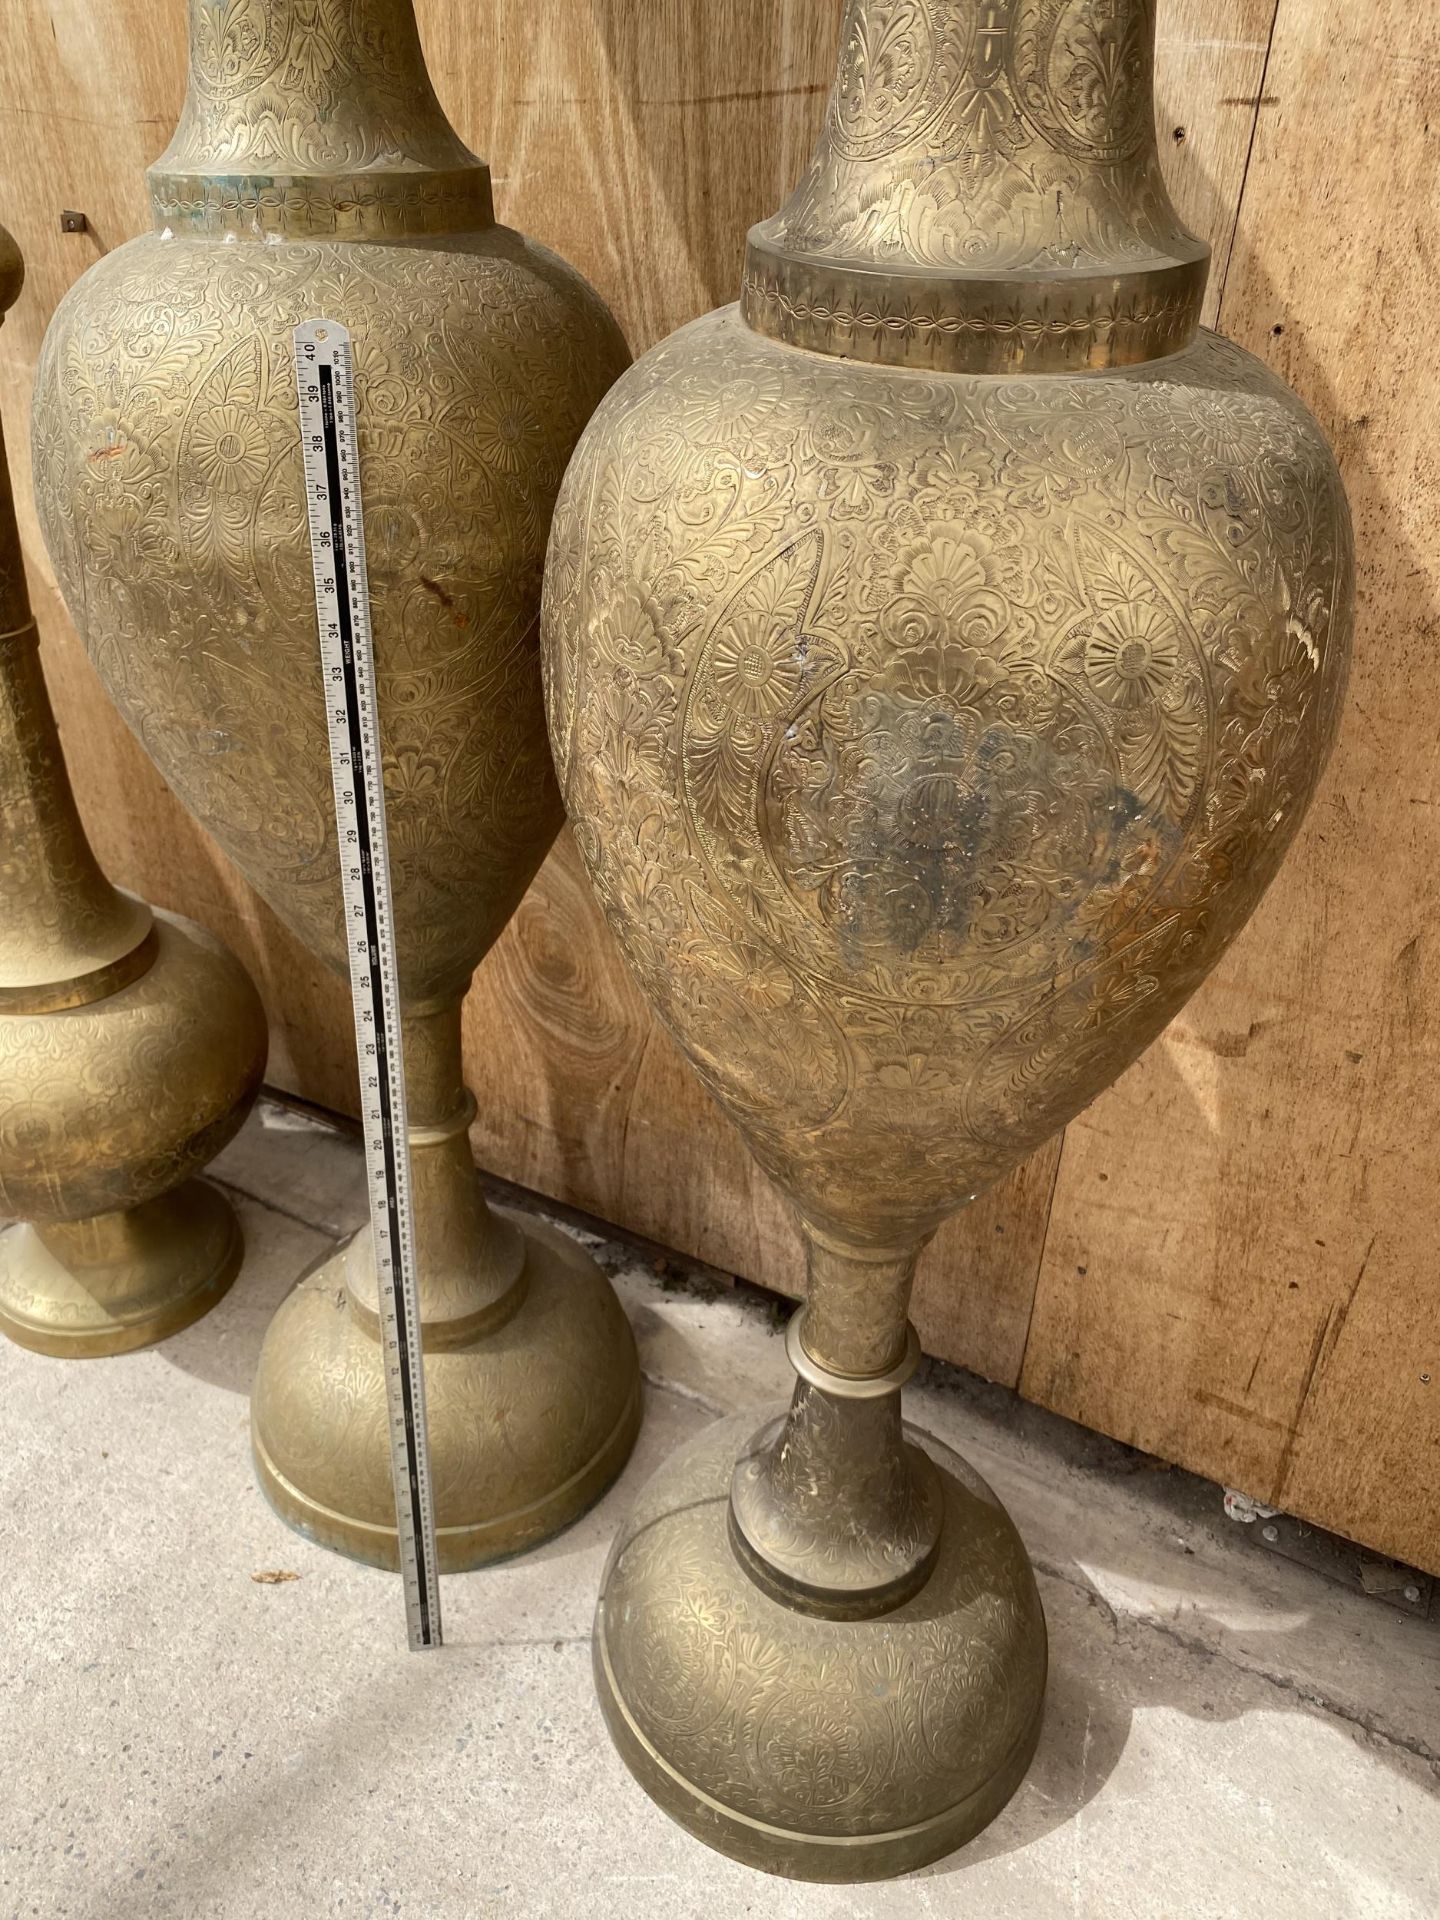 A PAIR OF LARGE VINTAGE DECORATIVE BRASS URNS (H:153CM) - Image 3 of 6